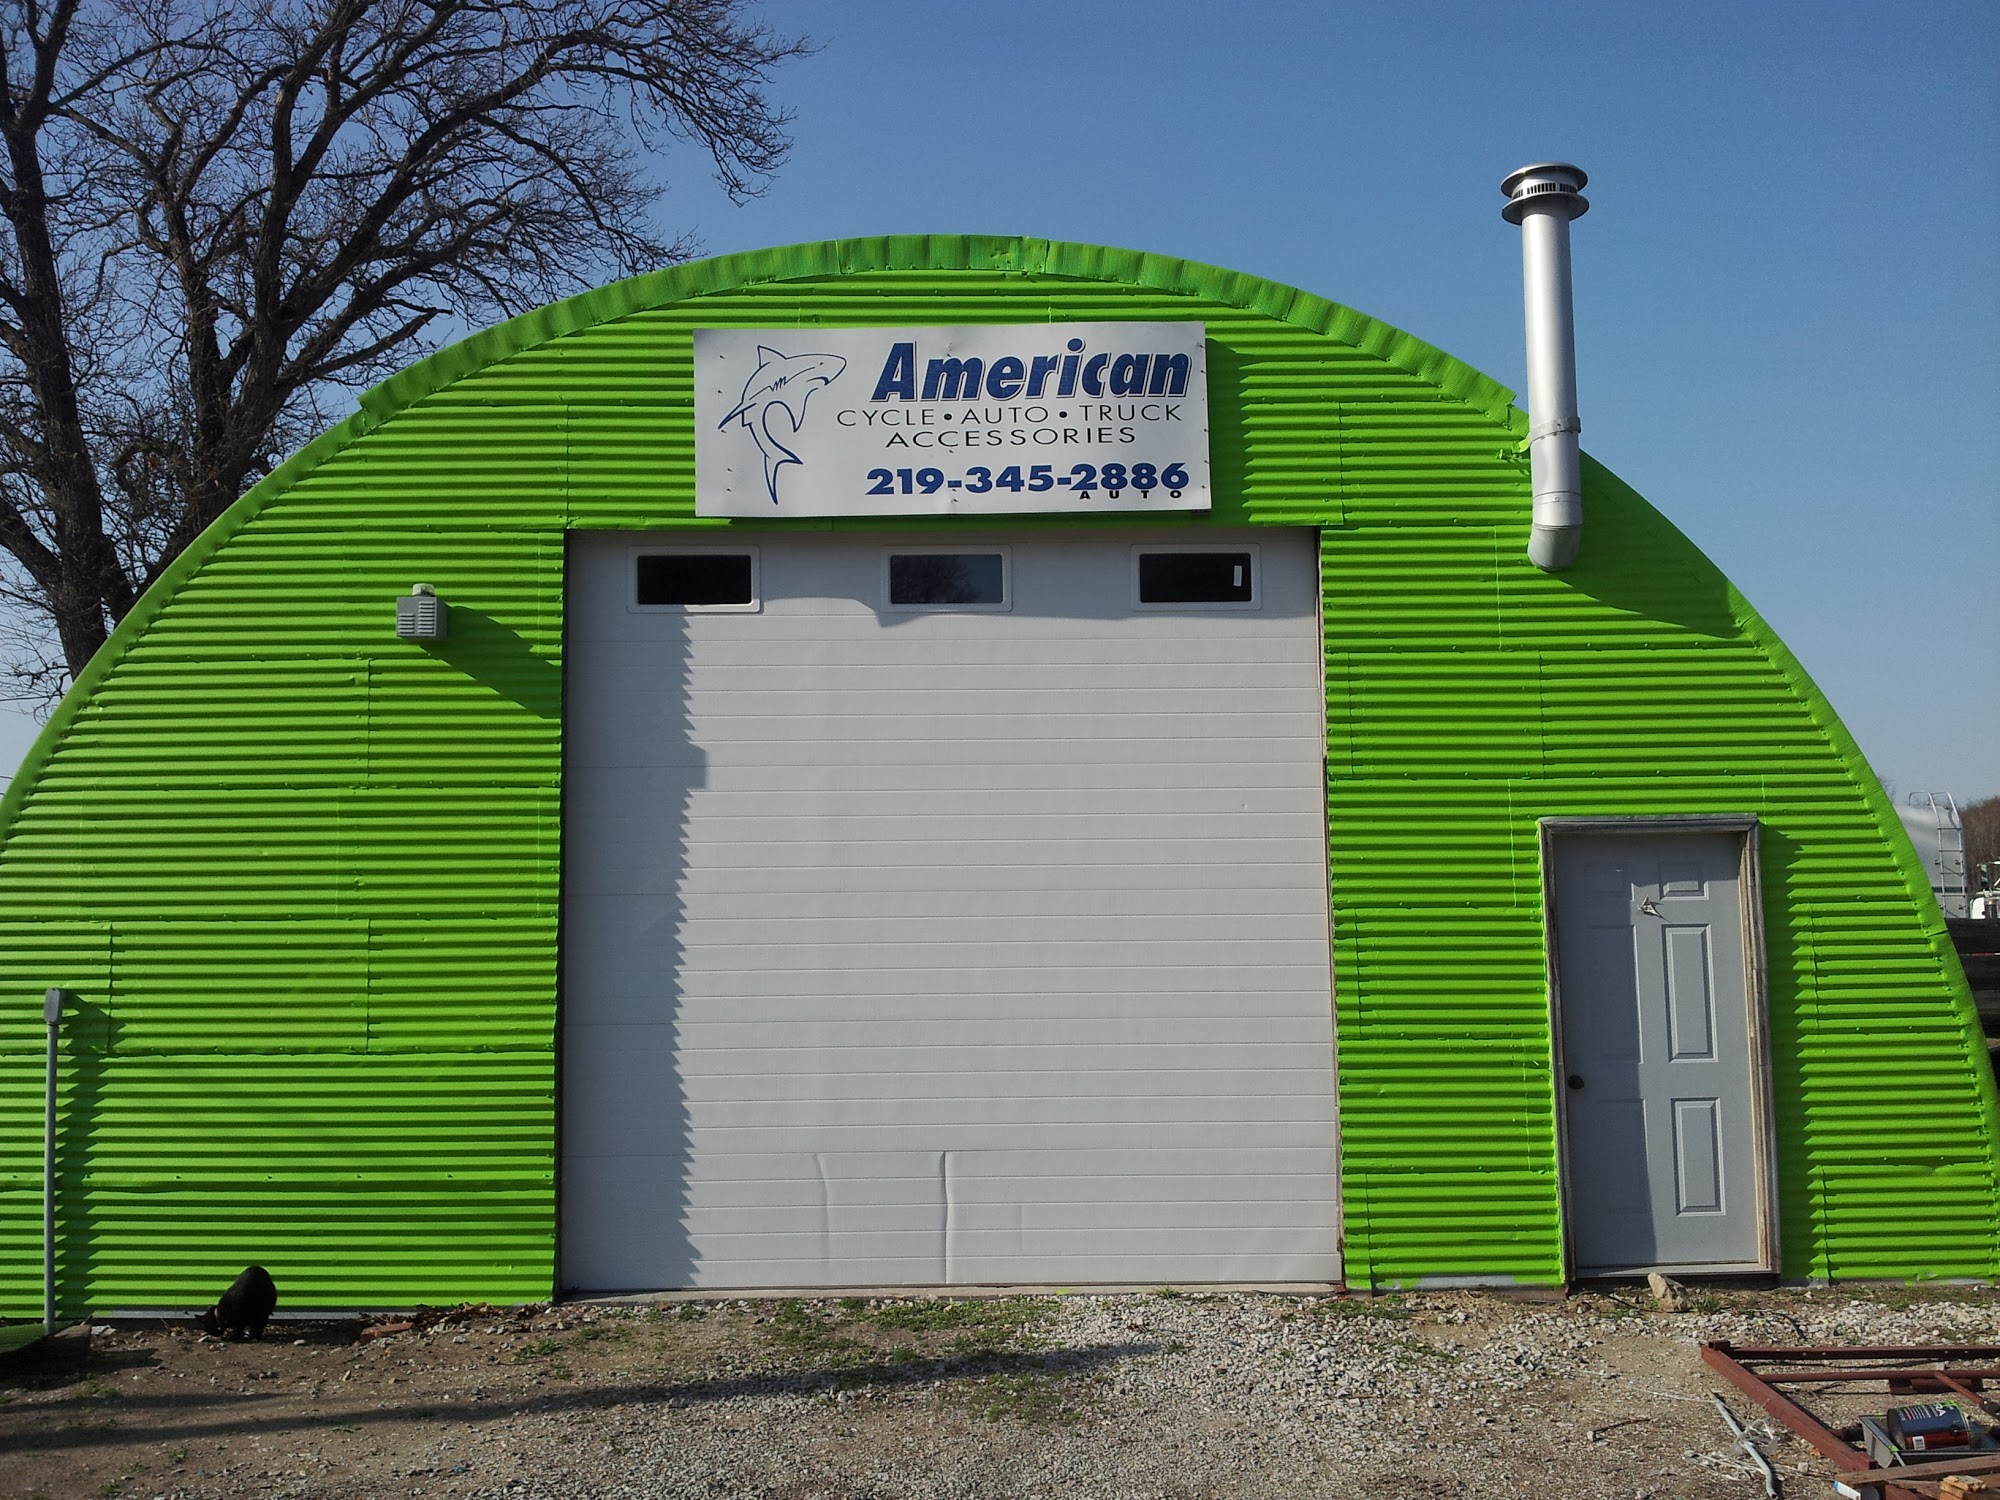 American Cycle Auto & Truck